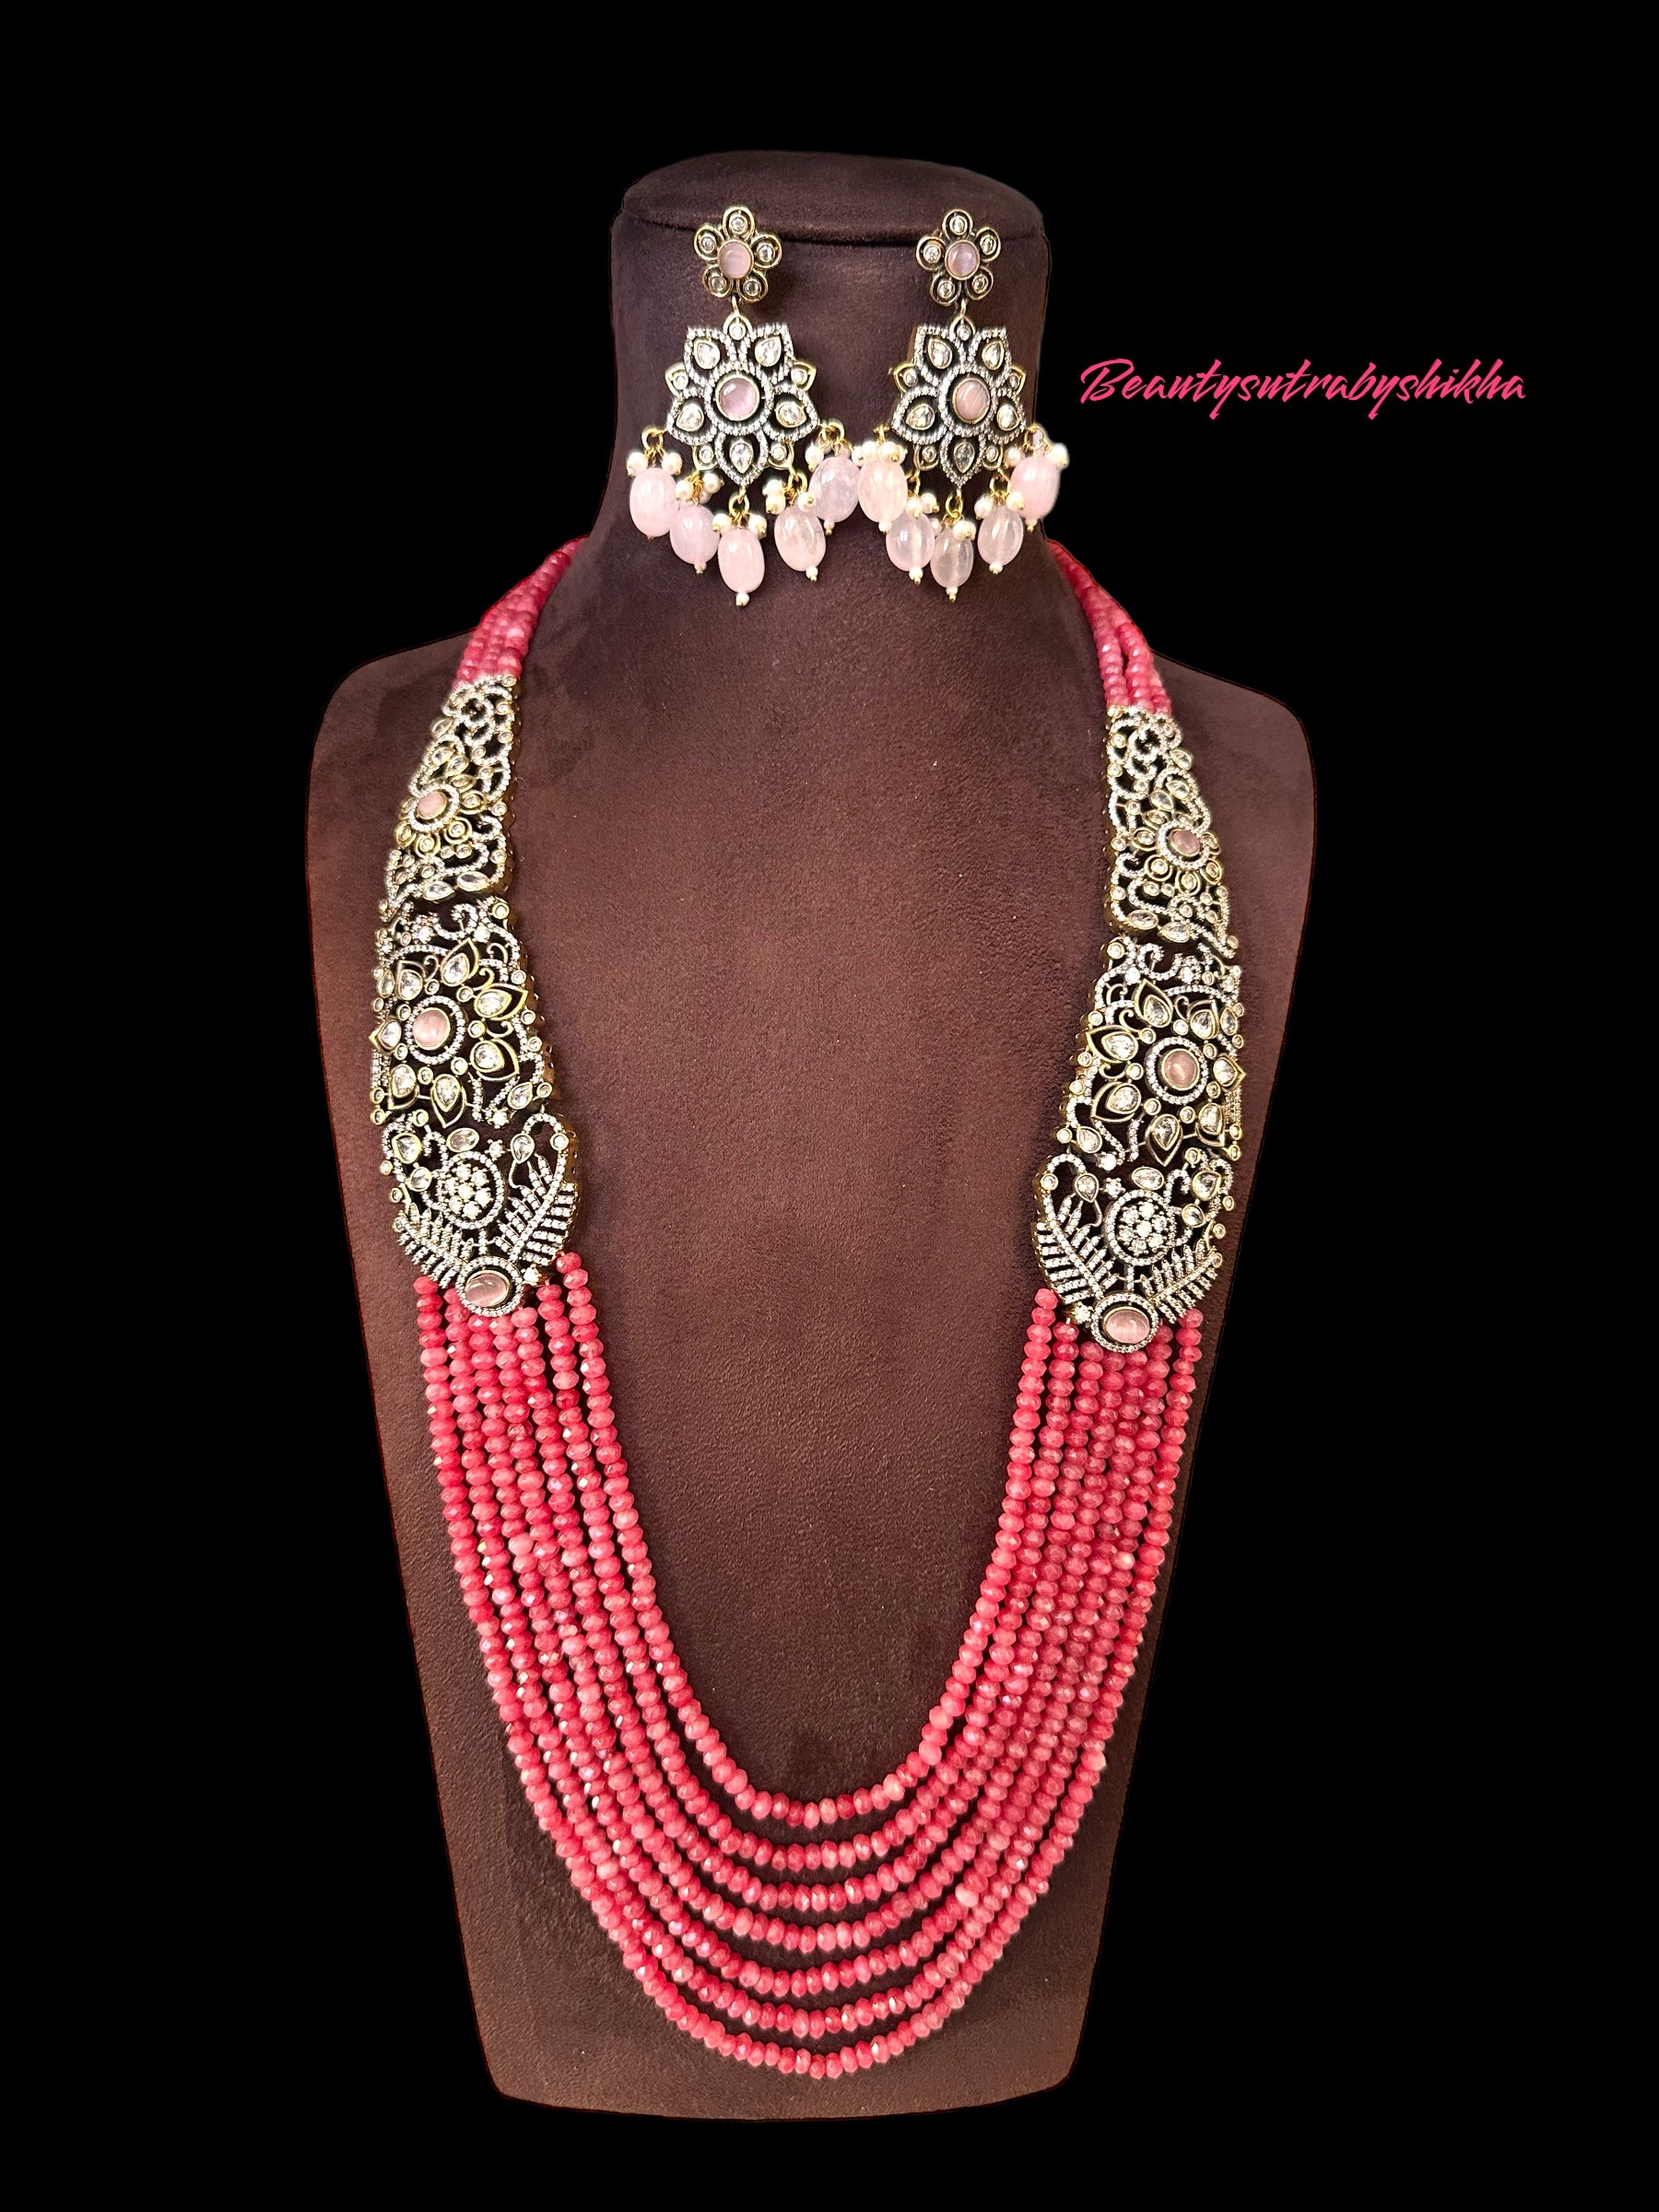 Beads Necklace Set with victorian earrings